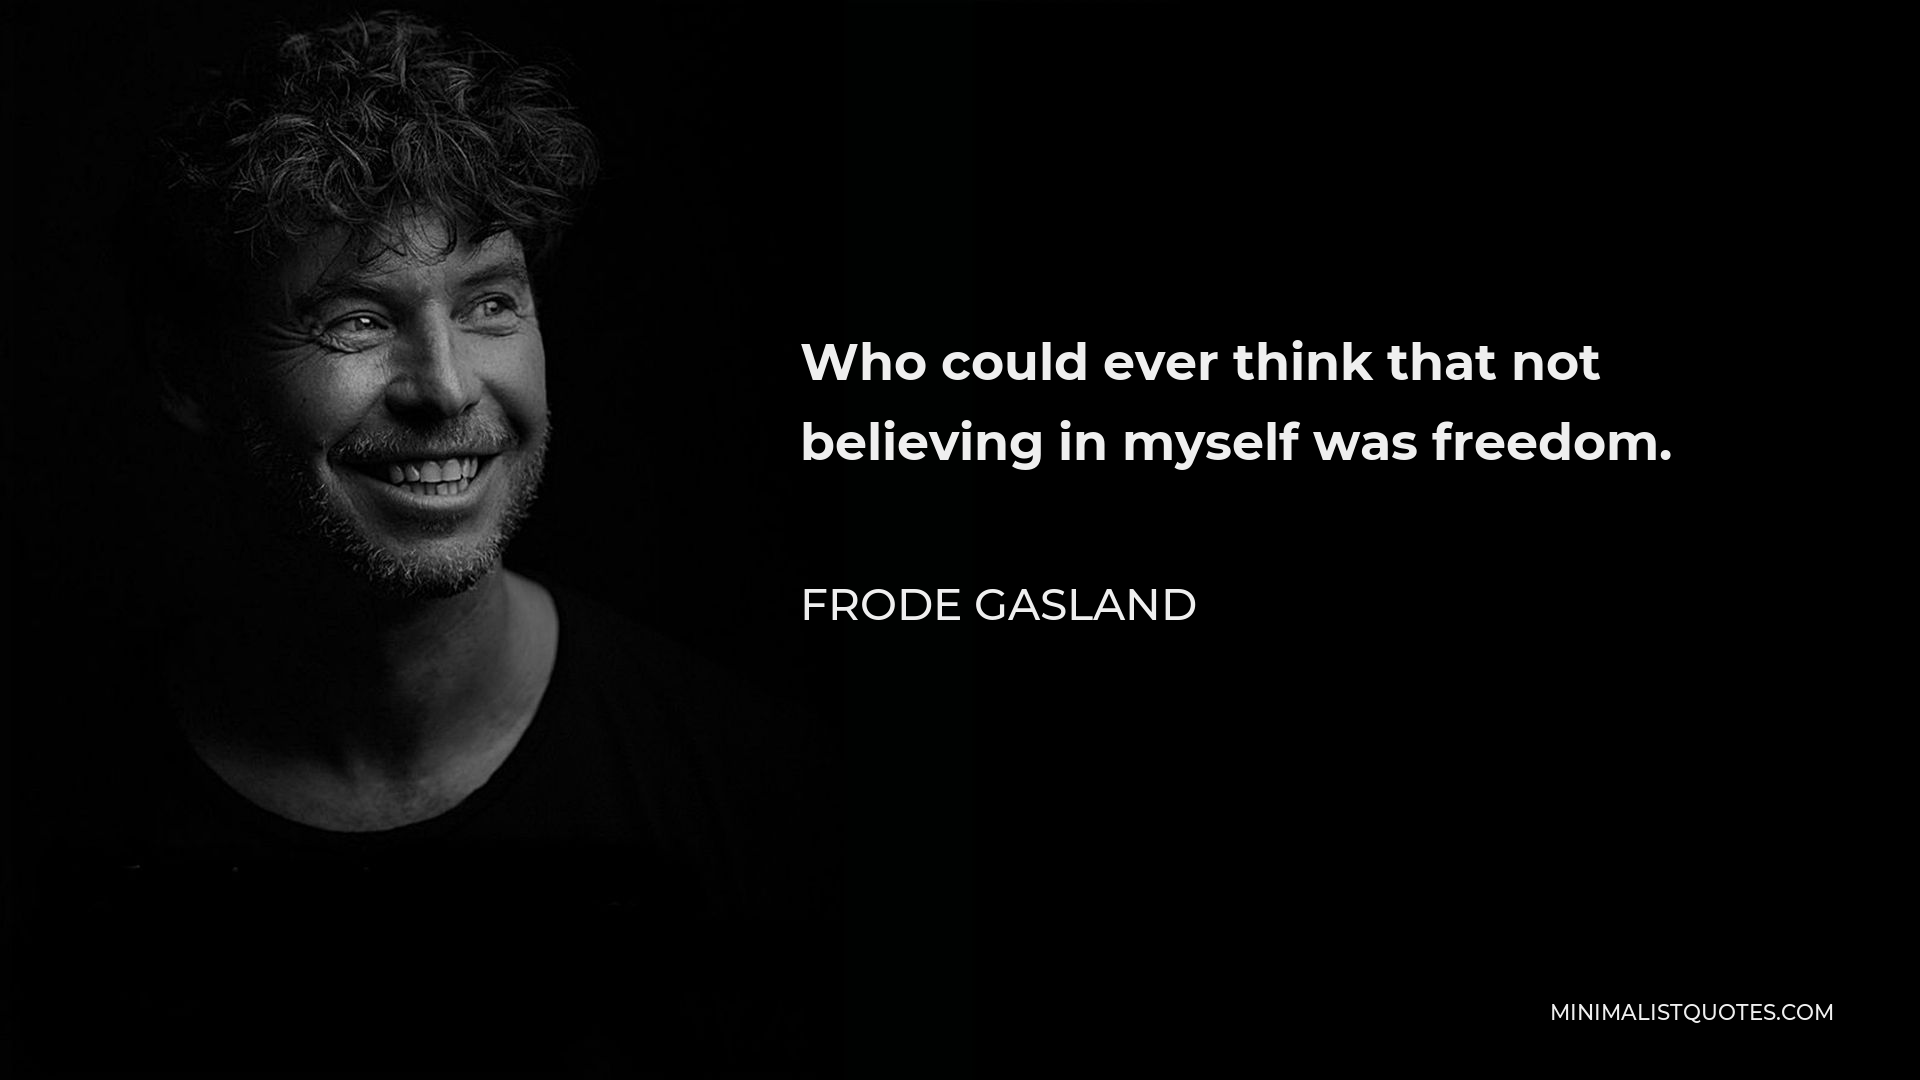 Frode Gasland Quote - Who could ever think that not believing in myself was freedom.